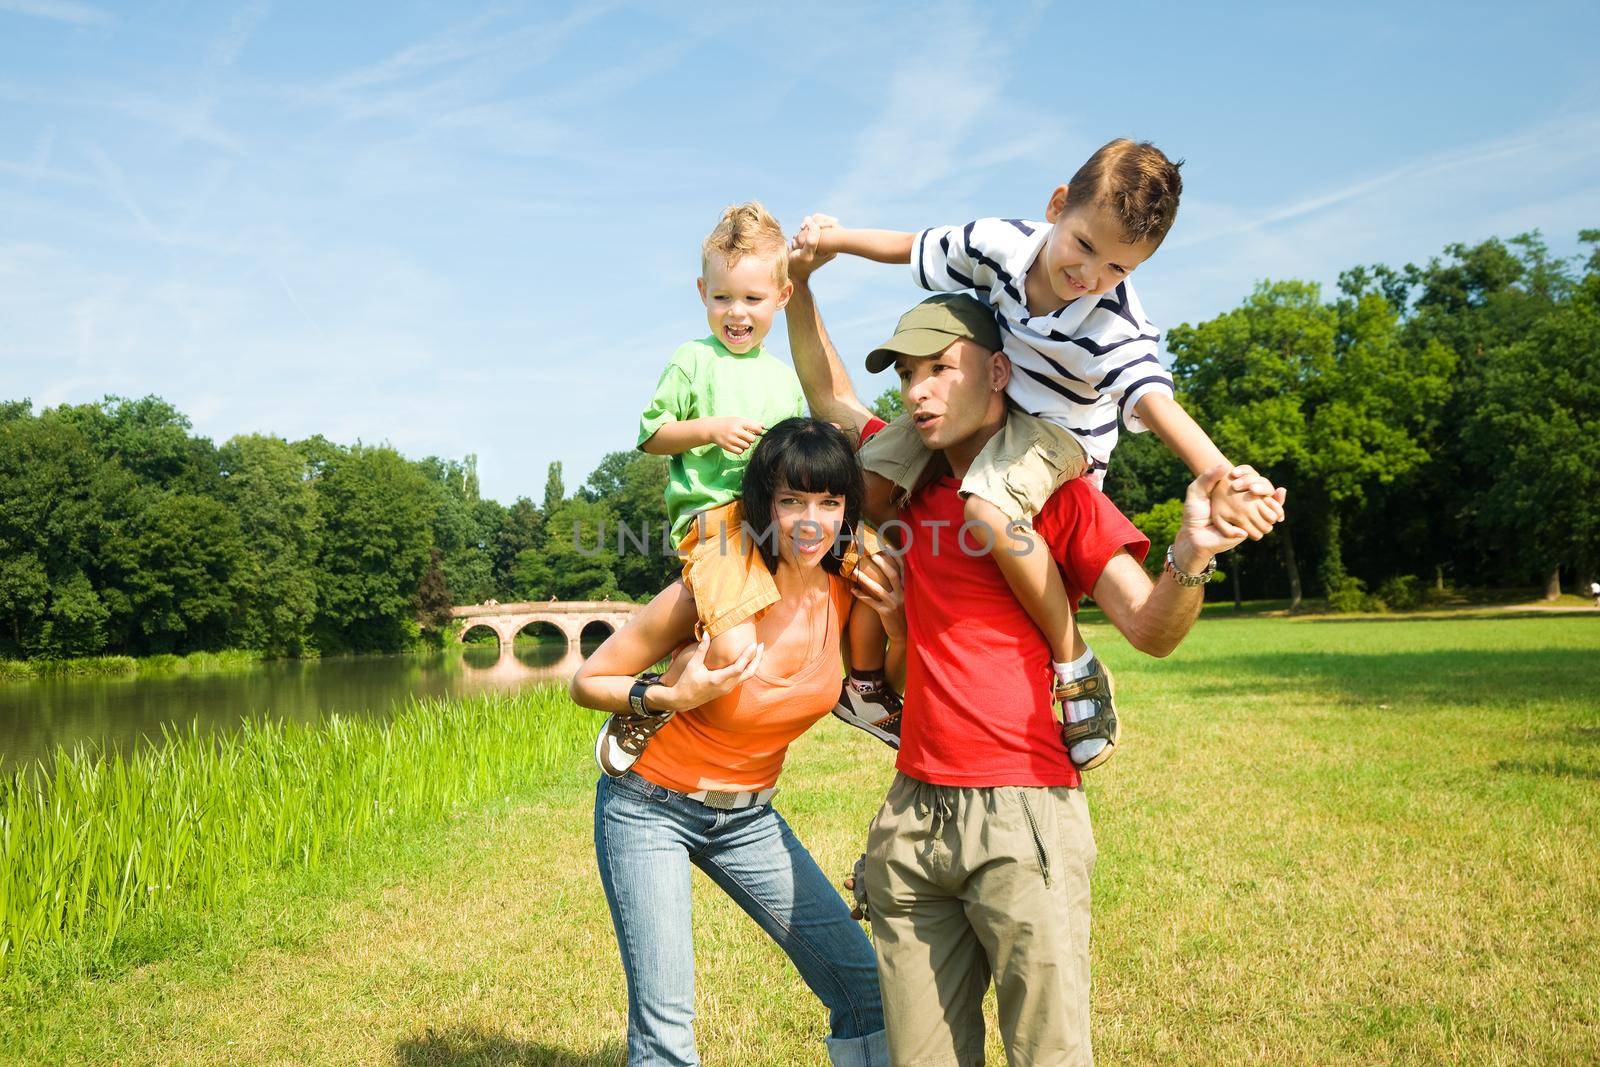 Family with two kids in a Park at a lake, carrying their children piggyback and having fun